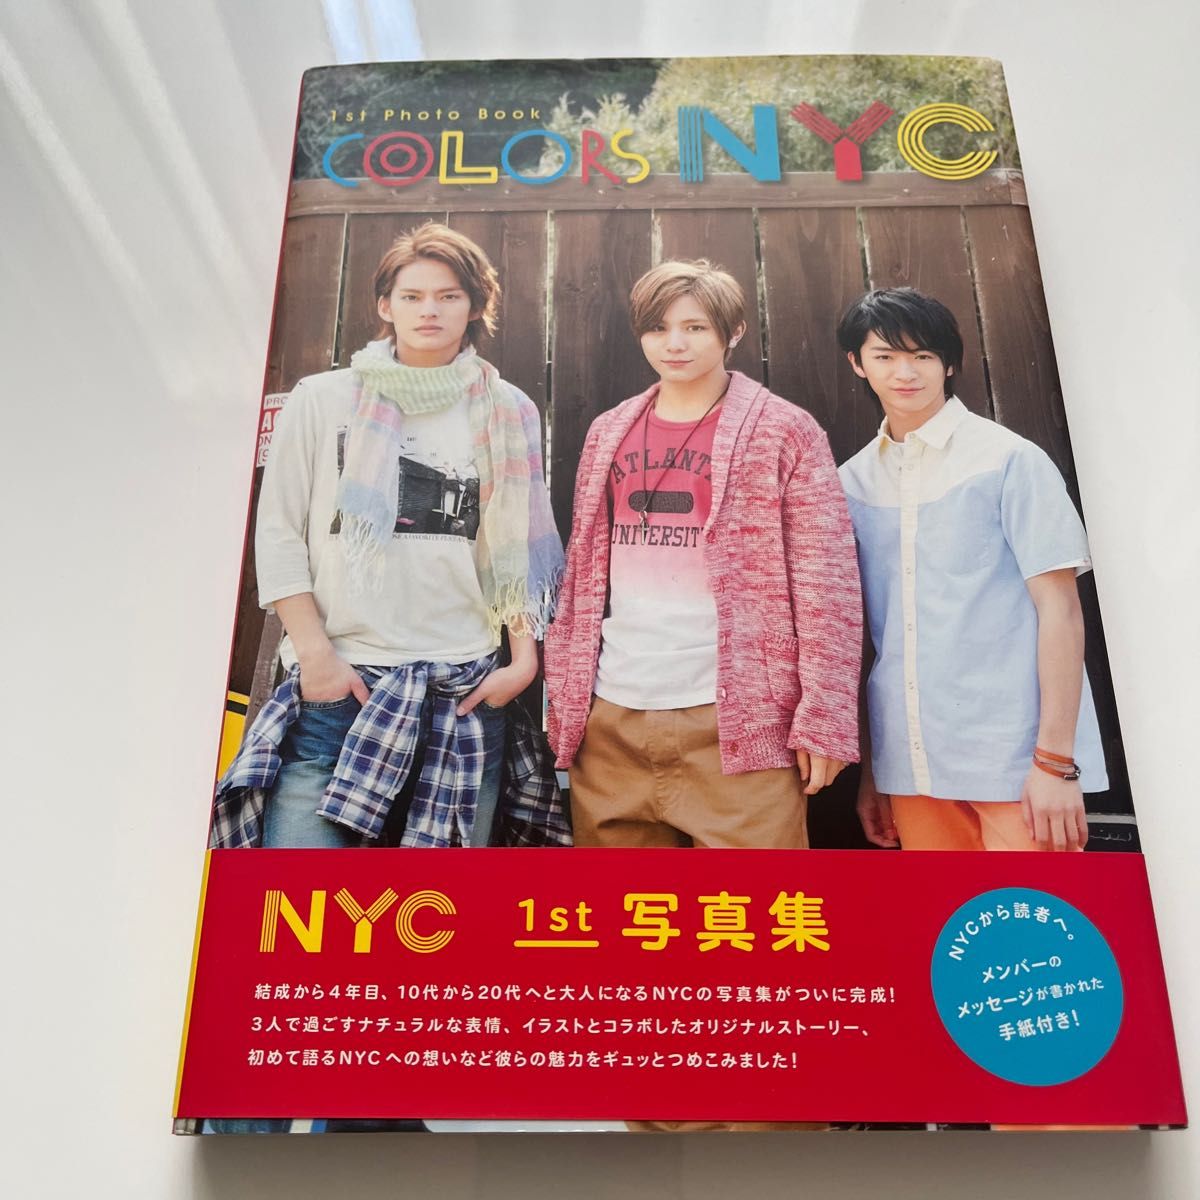 NYC COLORS 1st Photo Book